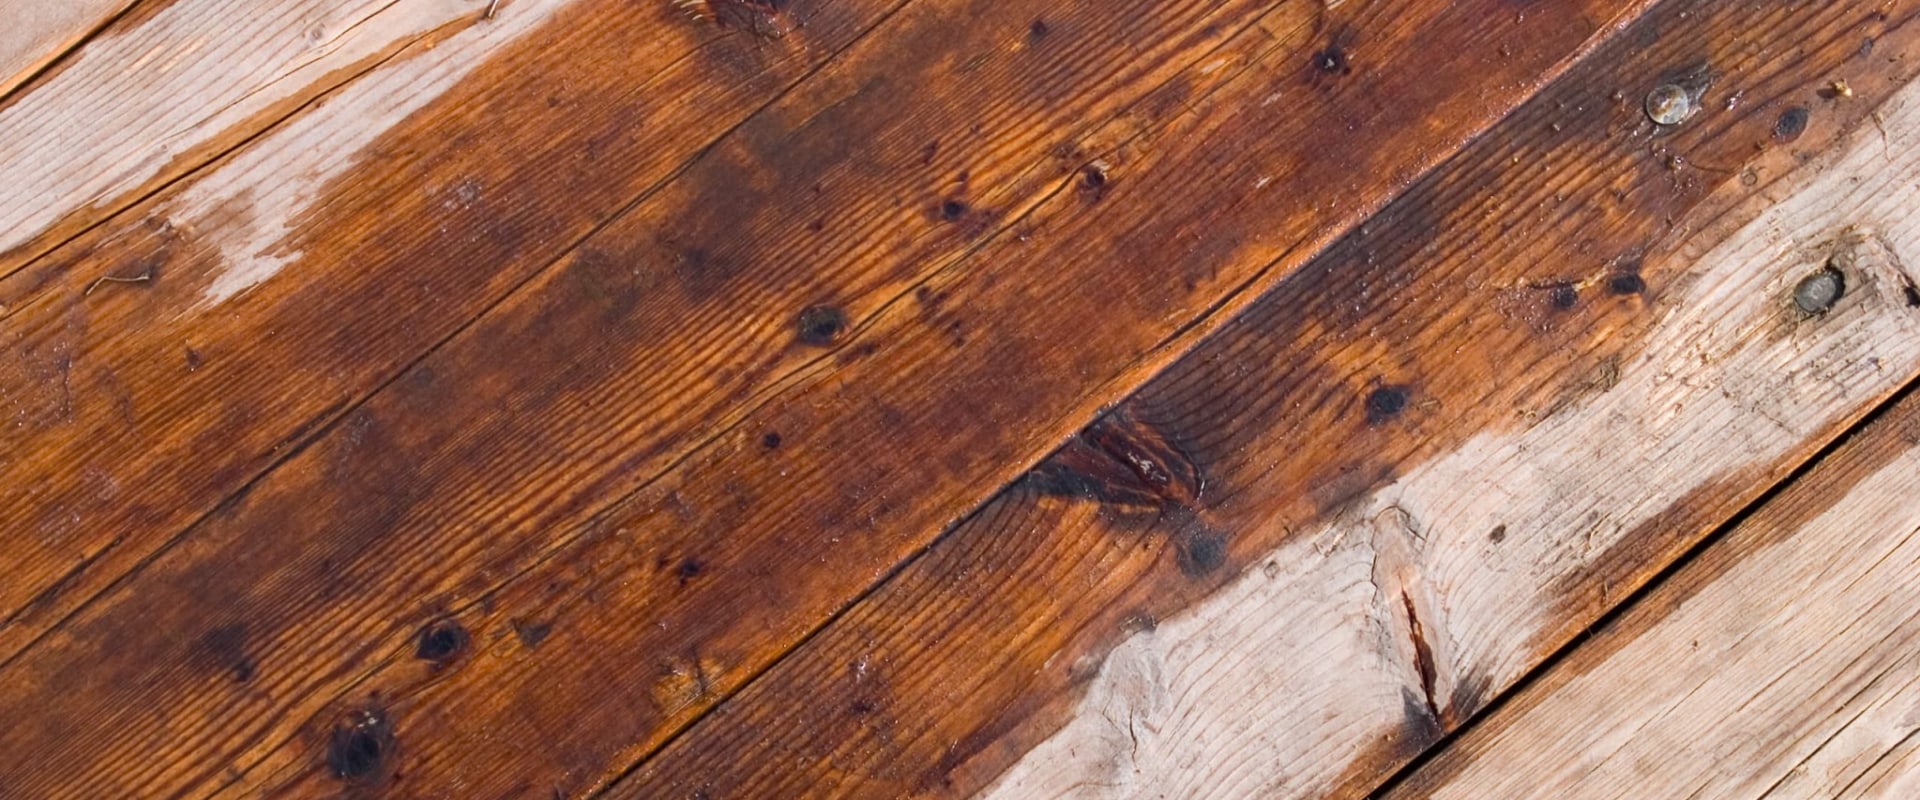 Can water damaged wood be repaired?